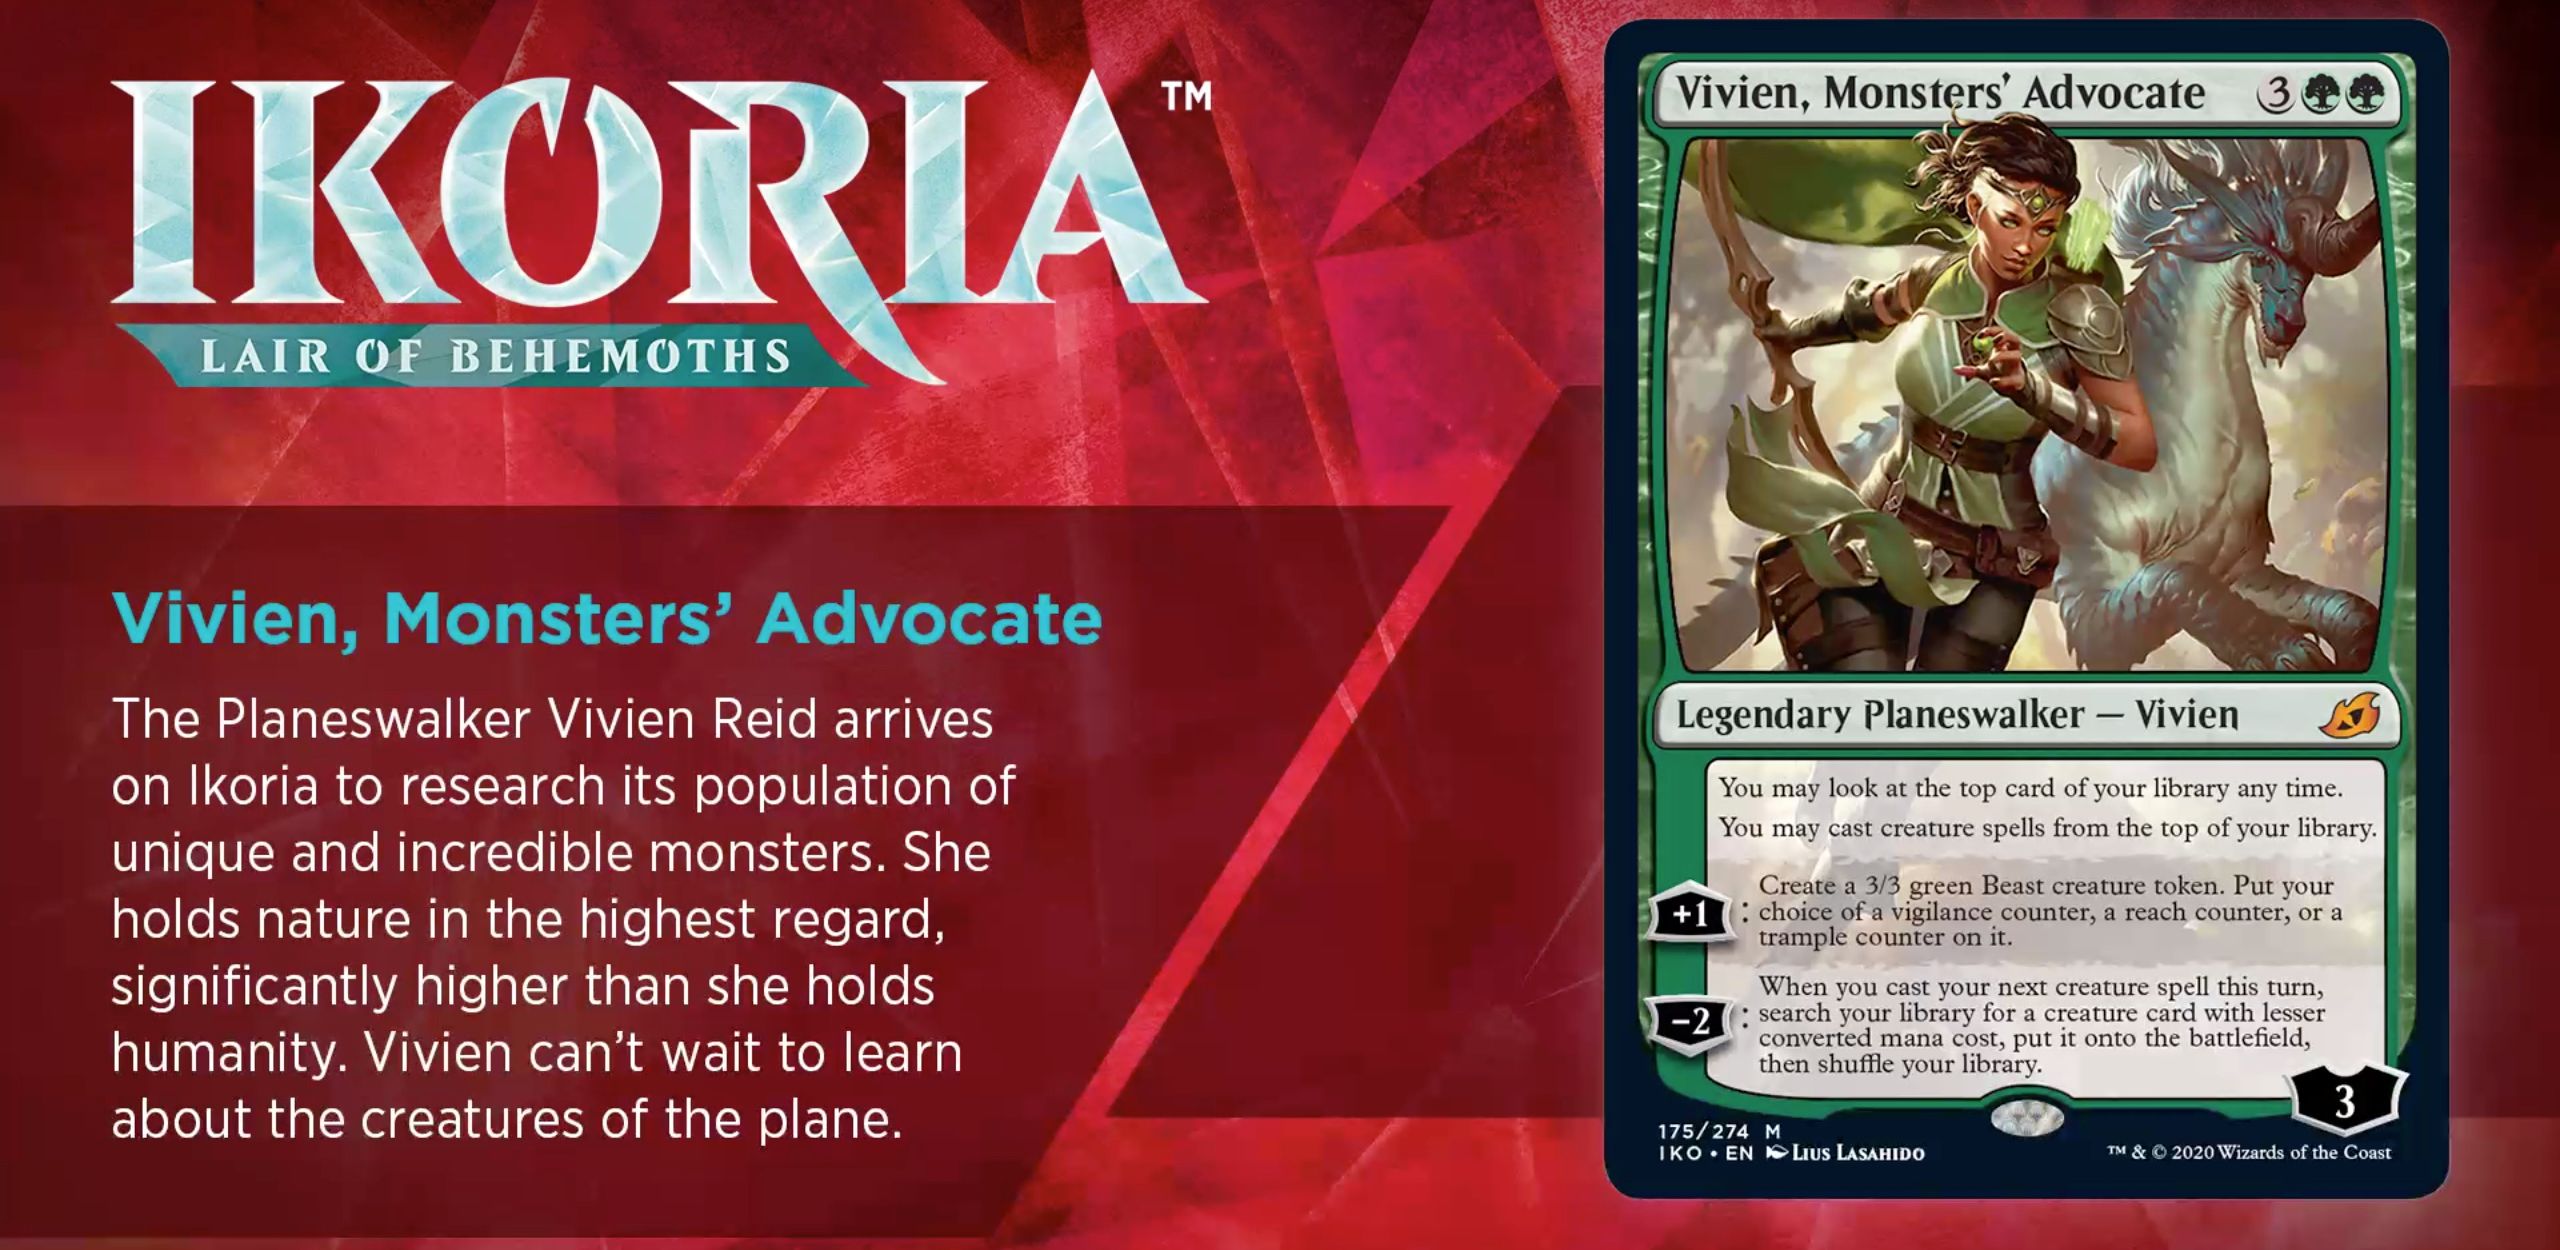 The Magic the Gathering Planeswalker, Vivien's new card